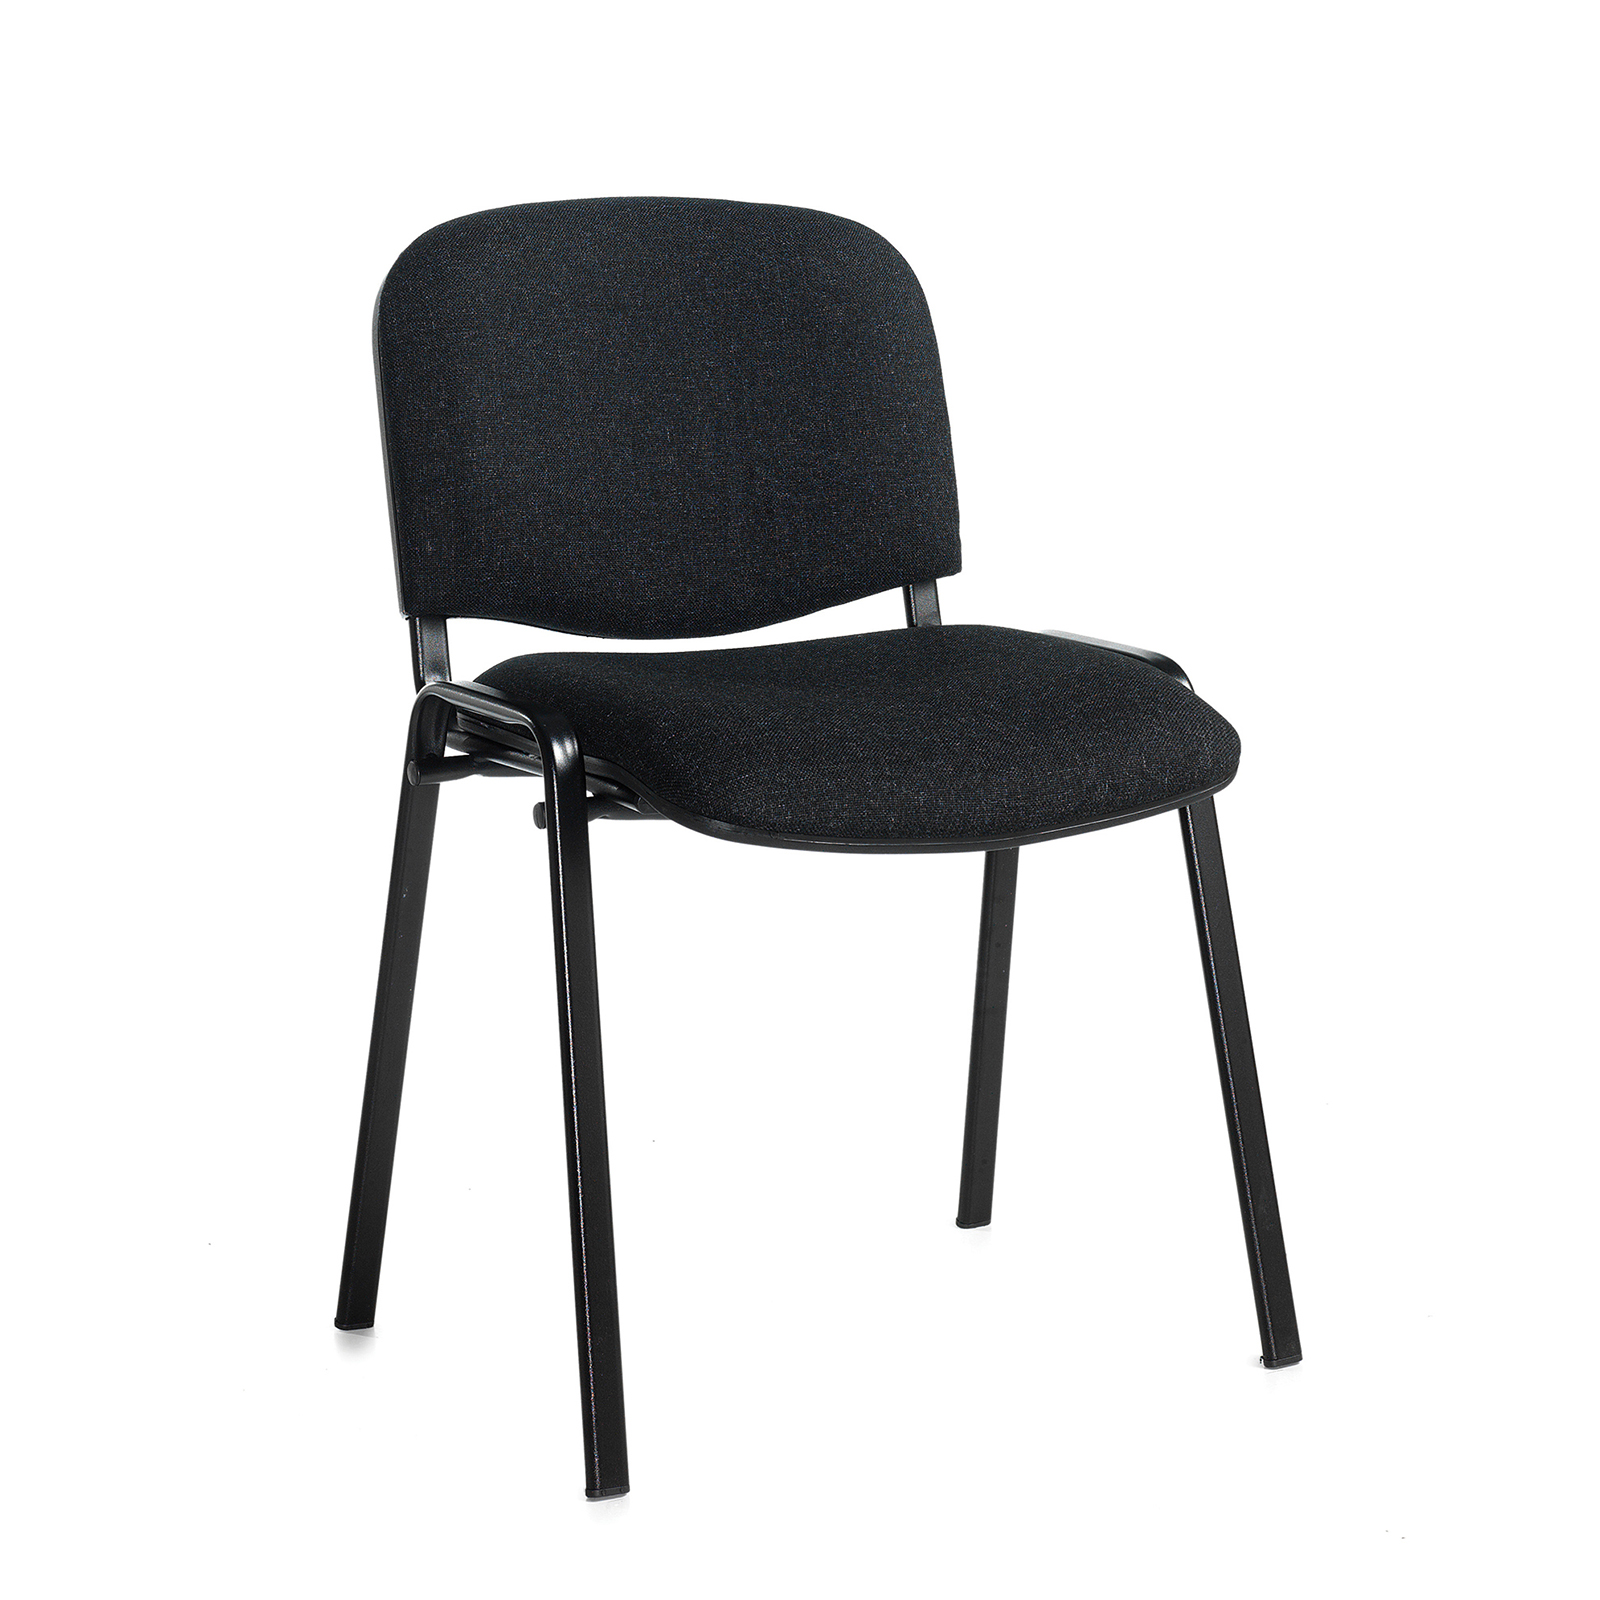 Boardroom / Meeting Taurus meeting room stackable chair with black frame and no arms - charcoal